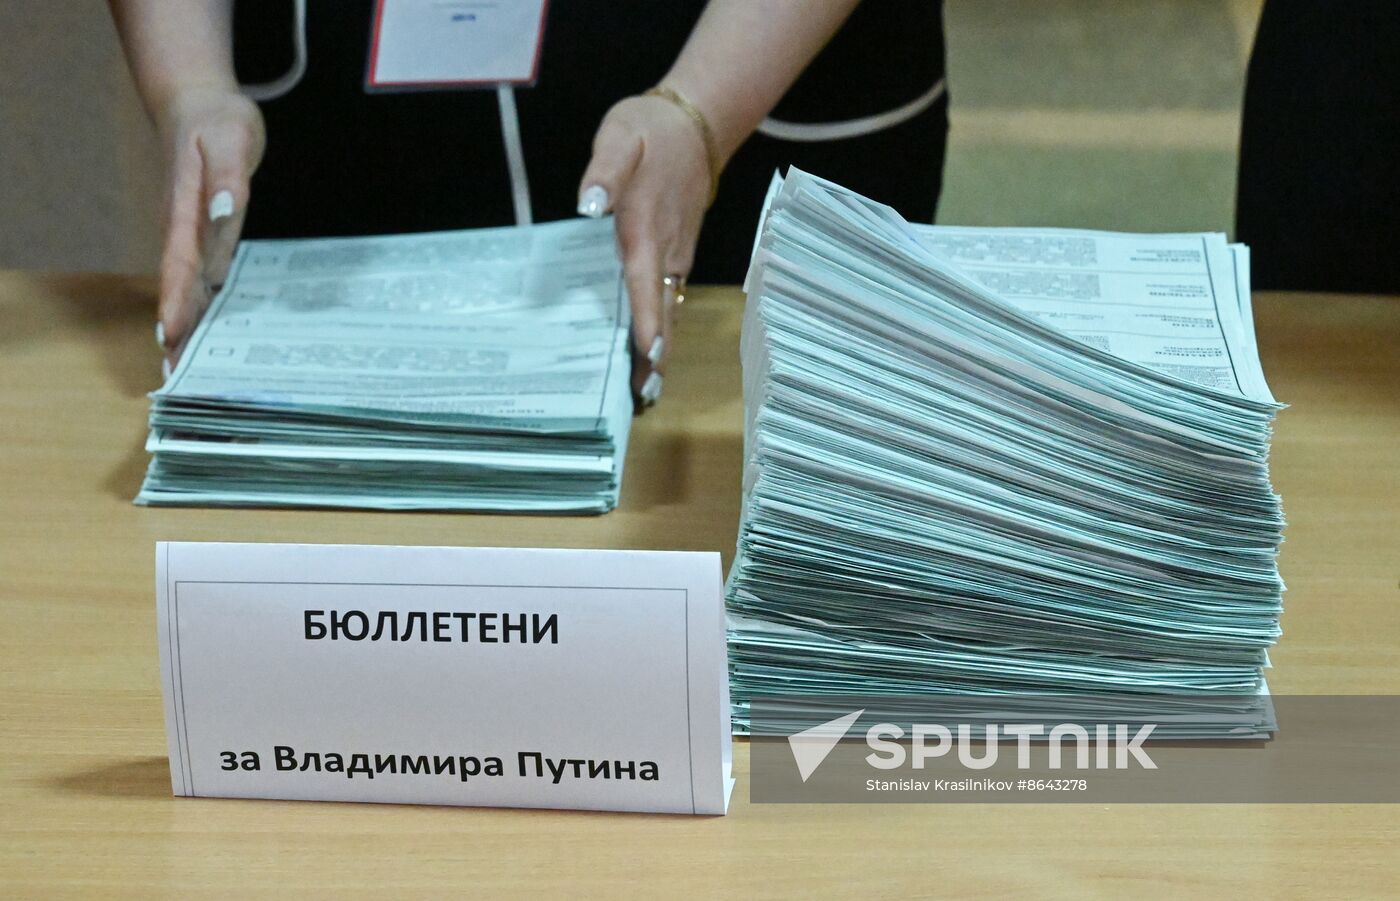 Russia Presidential Election Vote Counting